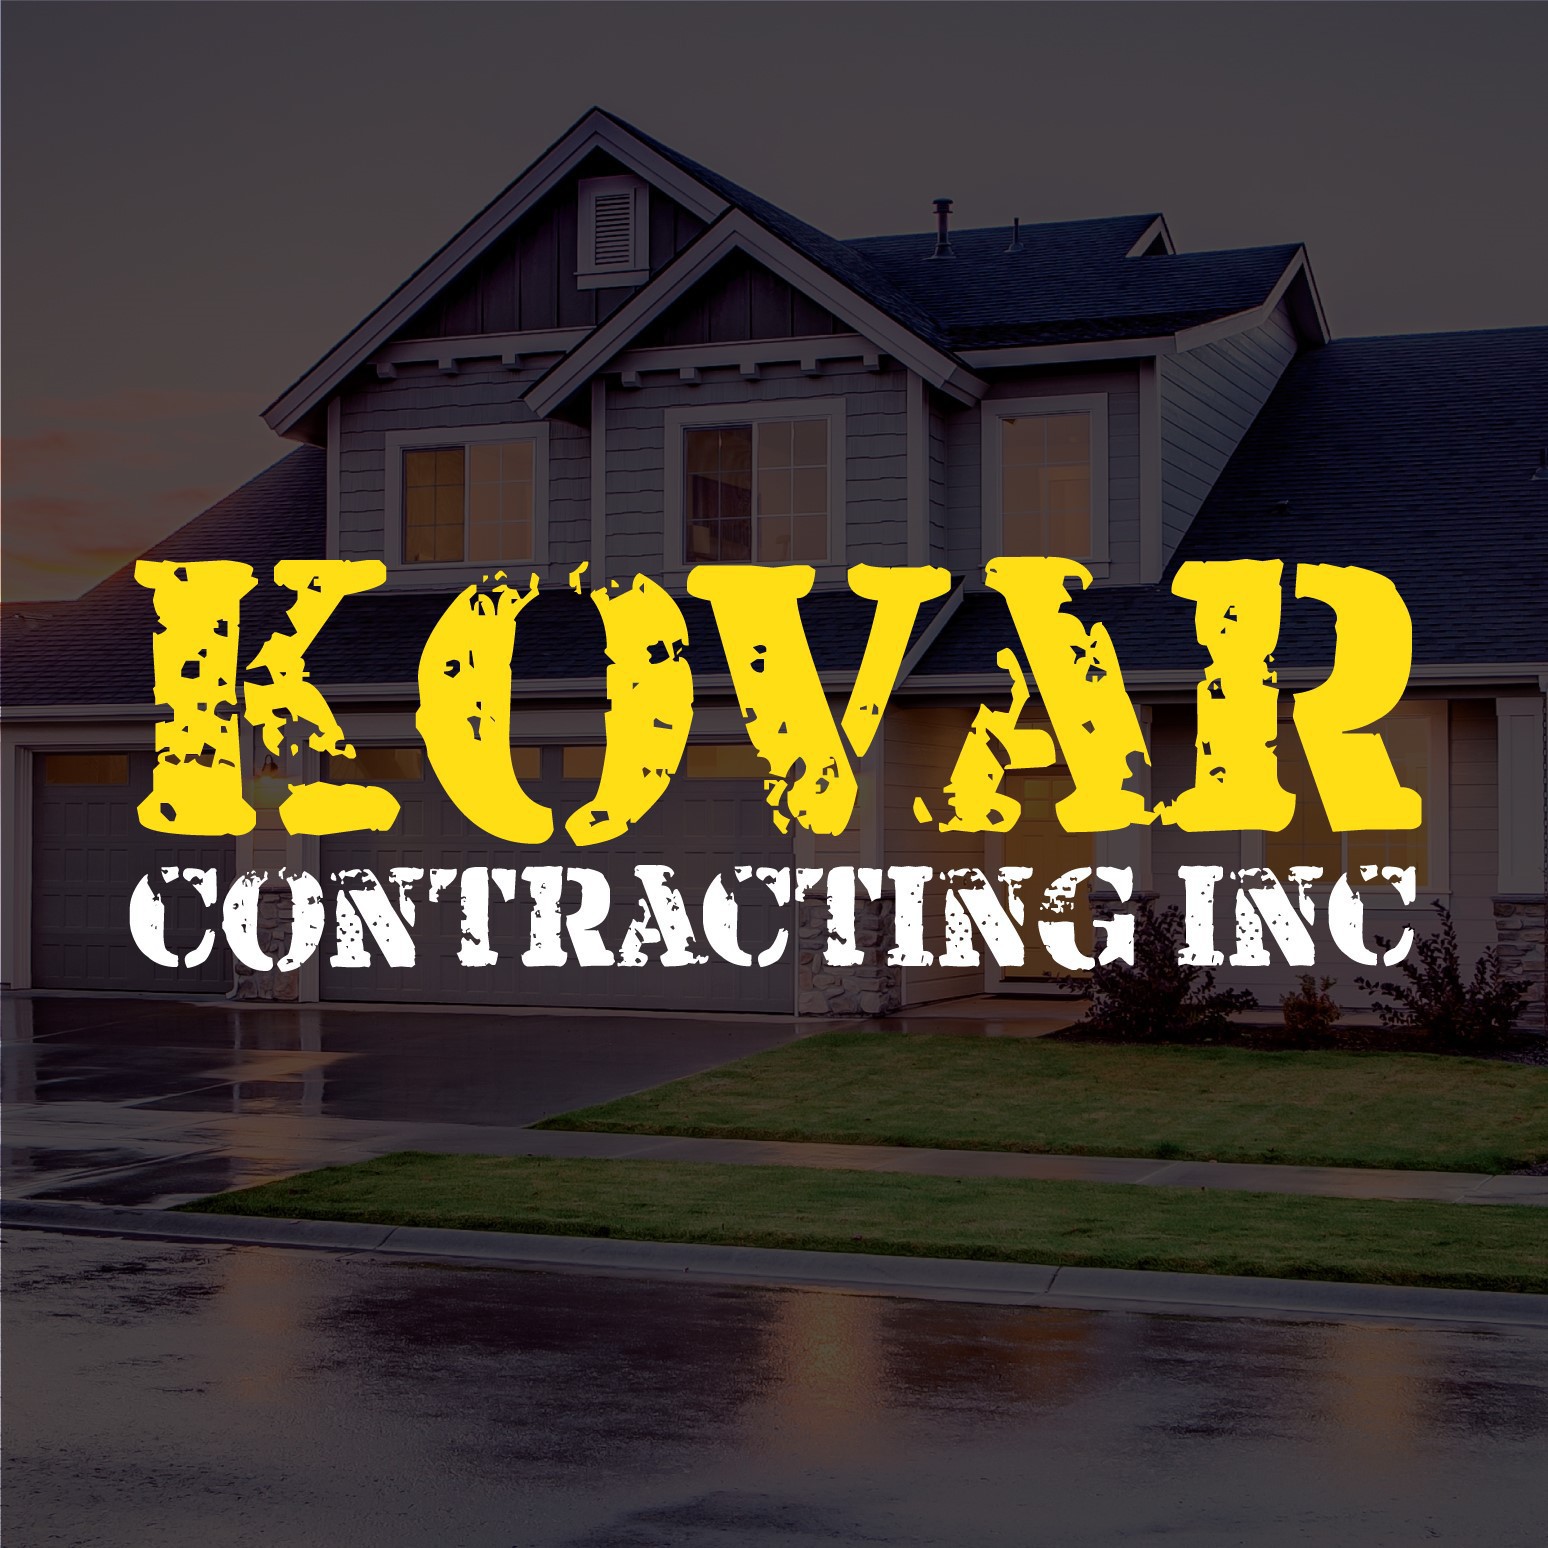 Kovar Contracting Inc a Division of Kovar Roofing Inc.'s logo